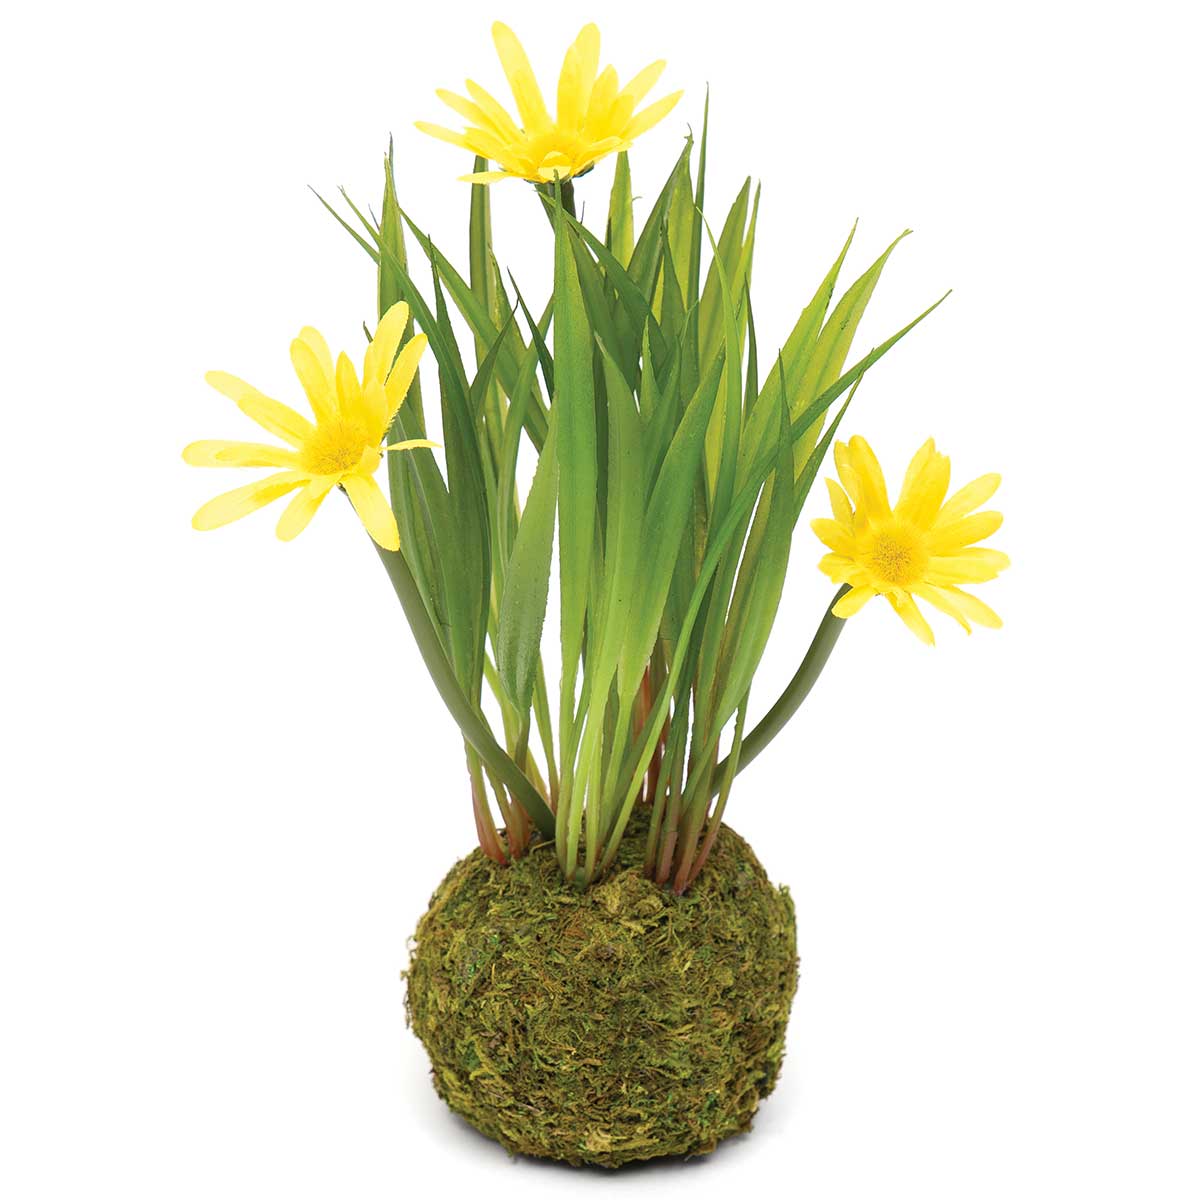 MINI DAISY ON MOSS BALL YELLOW 5IN X 8IN POLYESTER/PLASTIC